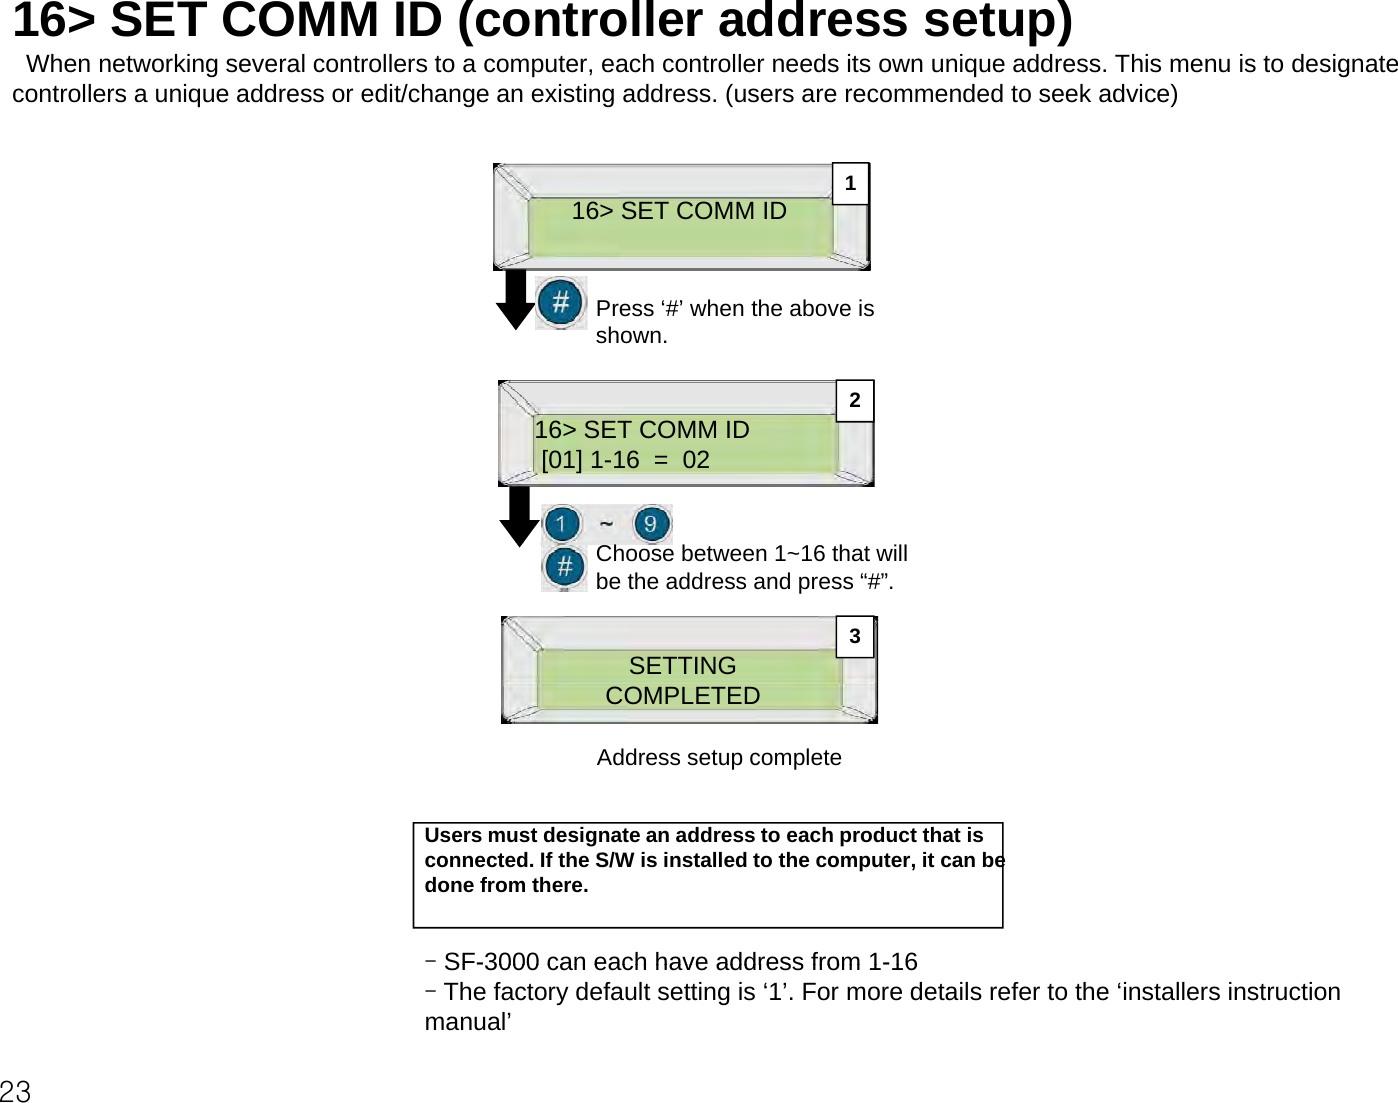 16&gt; SET COMM ID (controller address setup)When networking several controllers to a computer, each controller needs its own unique address. This menu is to designate controllers a unique address or edit/change an existing address. (users are recommended to seek advice)16&gt; SET COMM ID 1Press ‘#’ when the above is shown.216&gt; SET COMM ID[01] 1-16  =  022Choose between 1~16 that will be the address and press “#”.SETTING3COMPLETED Address setup complete-SF-3000 can each have address from 1-16Users must designate an address to each product that is connected. If the S/W is installed to the computer, it can be done from there.23SF-3000 can each have address from 1-16 -The factory default setting is ‘1’. For more details refer to the ‘installers instruction manual’